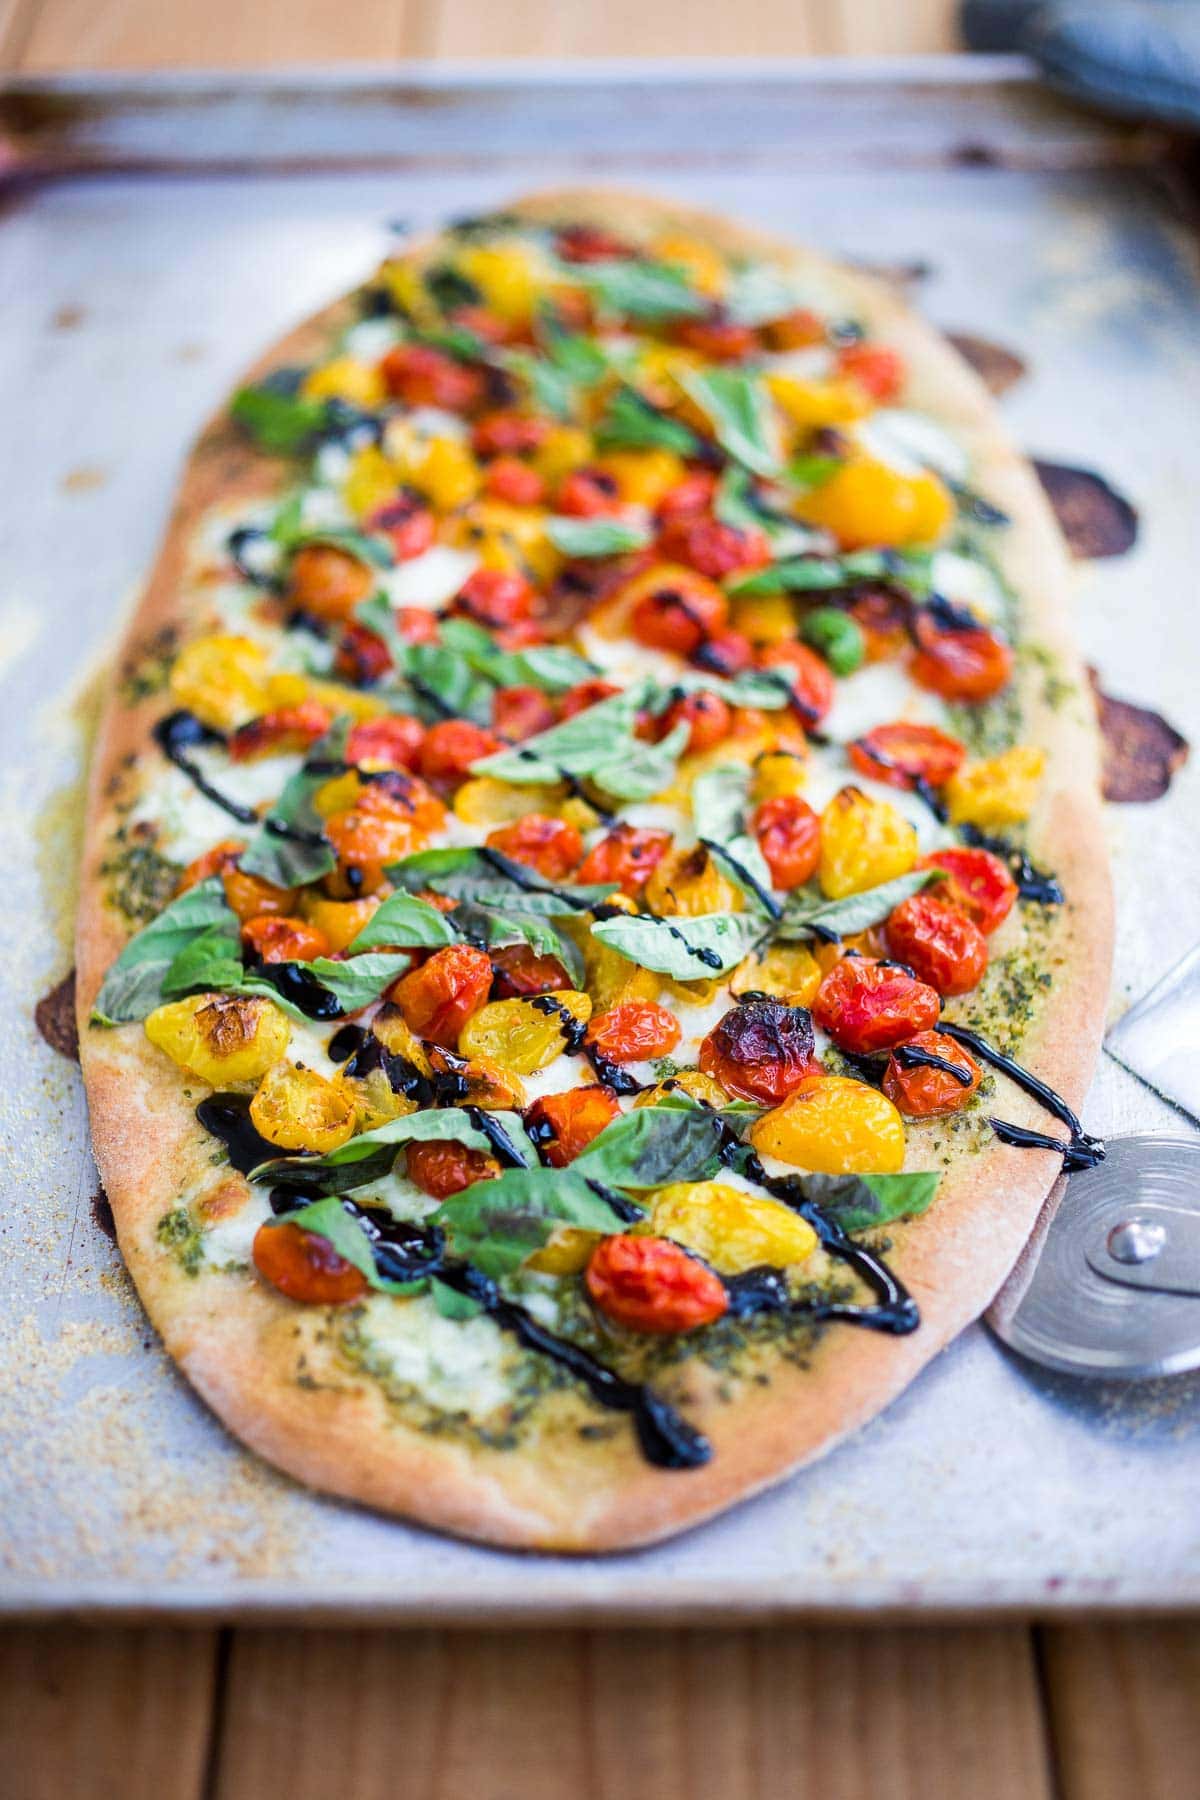 Make a simple, delicious Caprese Pizza with tomatoes, fresh mozzarella, basil leaves and basil oil topped with a balsamic glaze. Use store-bought pizza dough or make your own!